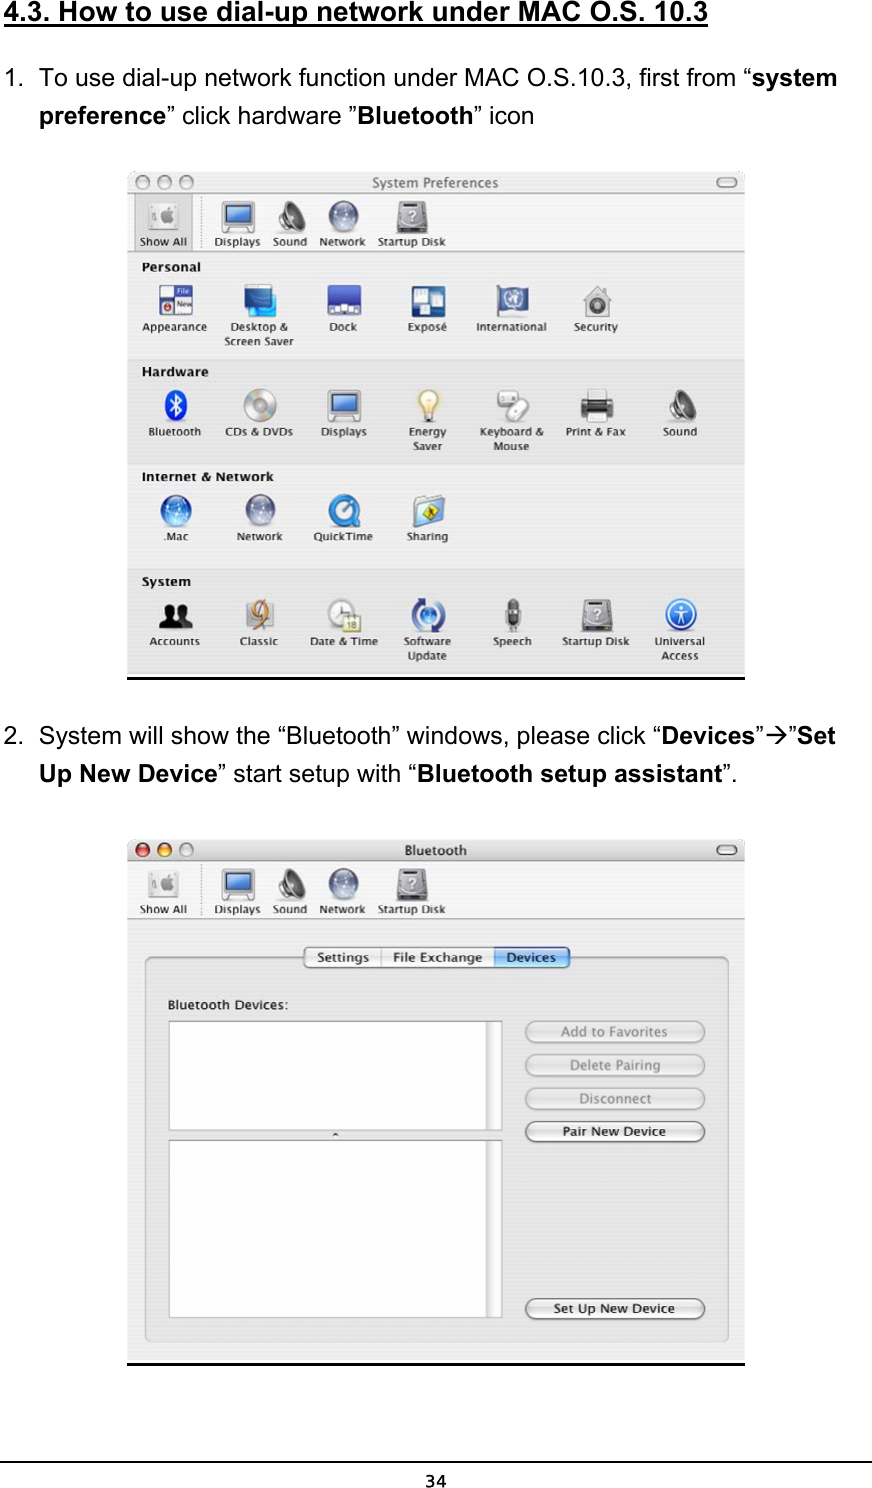   344.3. How to use dial-up network under MAC O.S. 10.3 1.  To use dial-up network function under MAC O.S.10.3, first from “system preference” click hardware ”Bluetooth” icon  2.  System will show the “Bluetooth” windows, please click “Devices”Æ”Set Up New Device” start setup with “Bluetooth setup assistant”.  